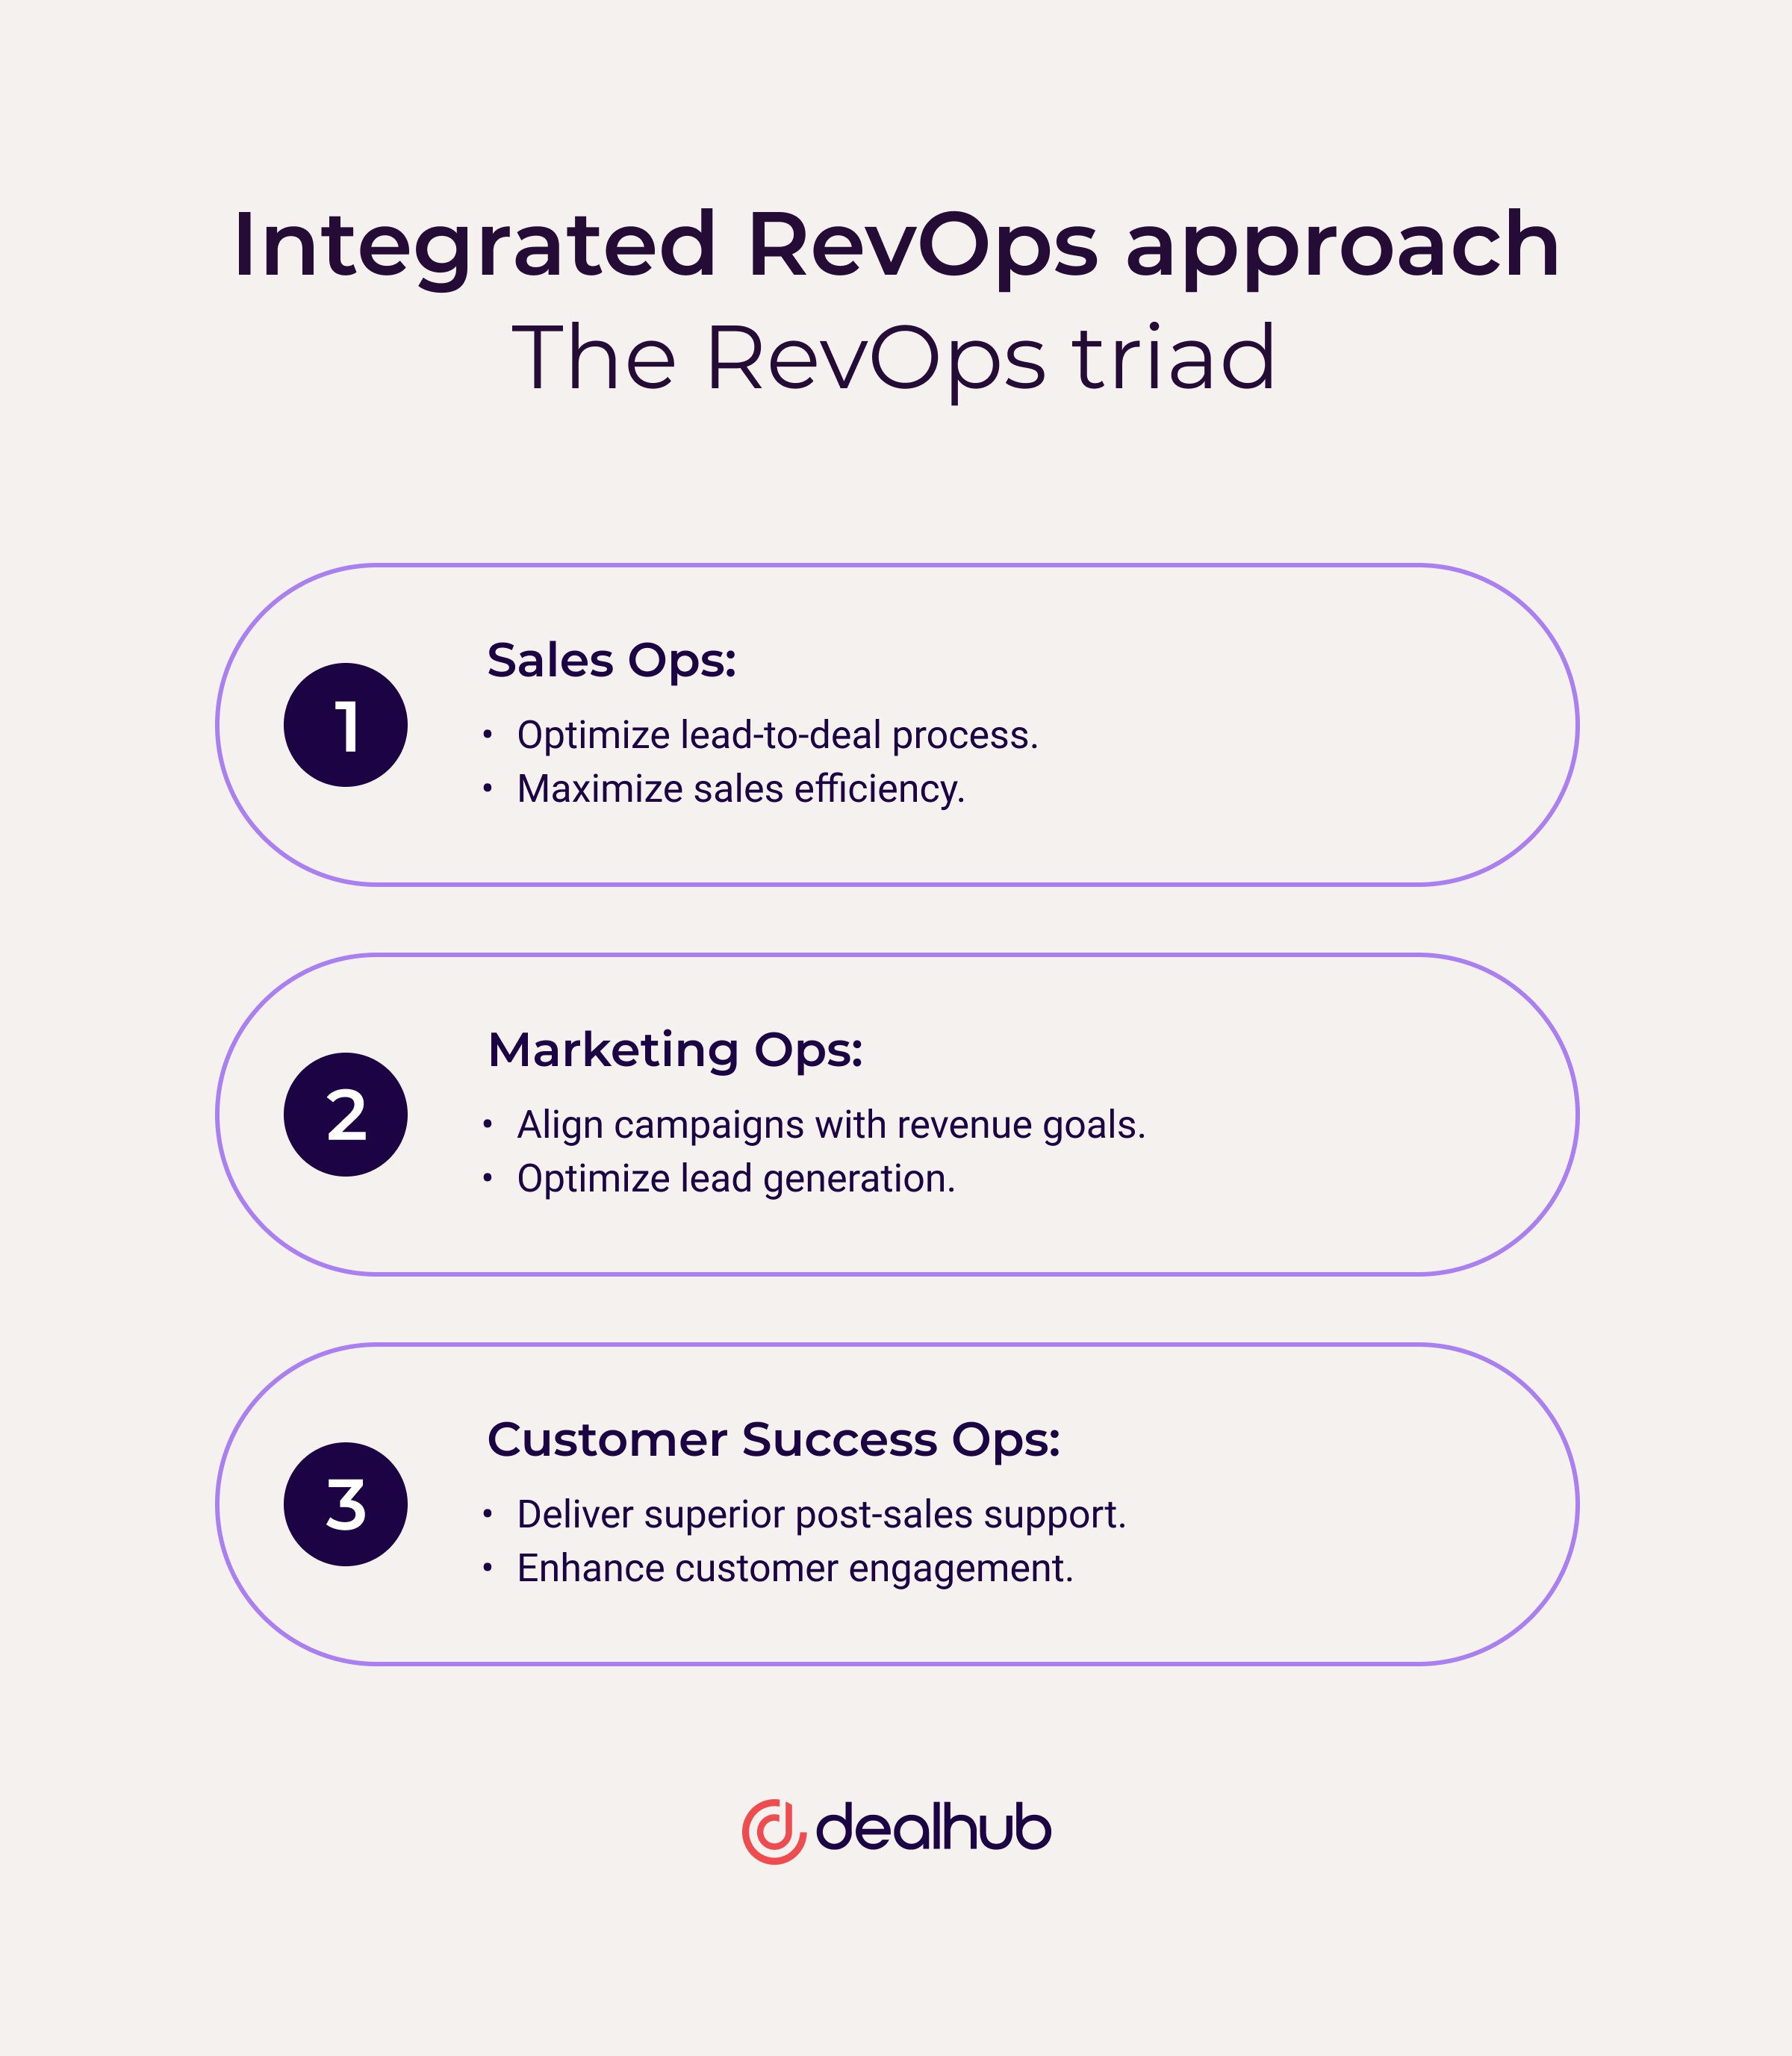 RevOps: an integrated approach to driving revenue